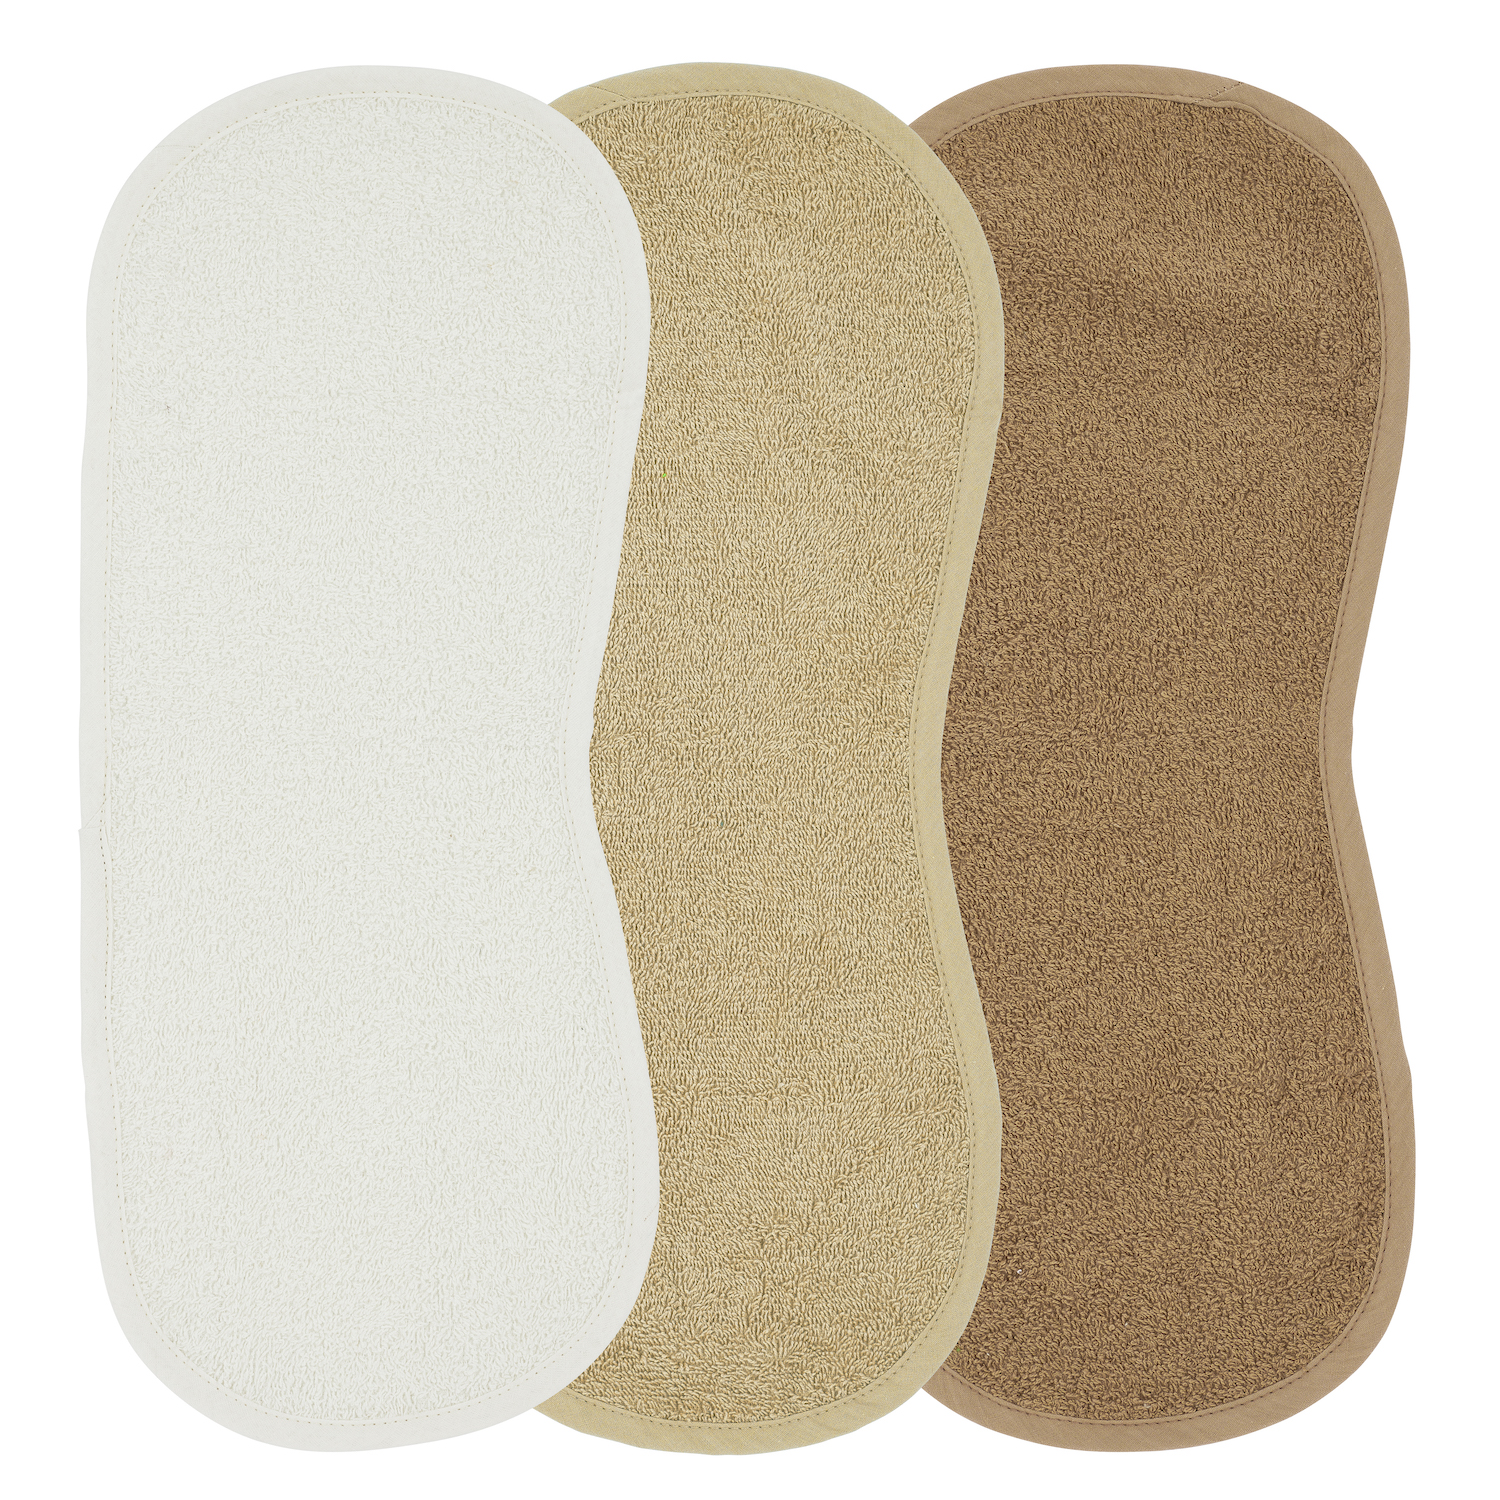 Burb cloth 3-pack terry Uni - offwhite/sand/toffee - 53x20cm